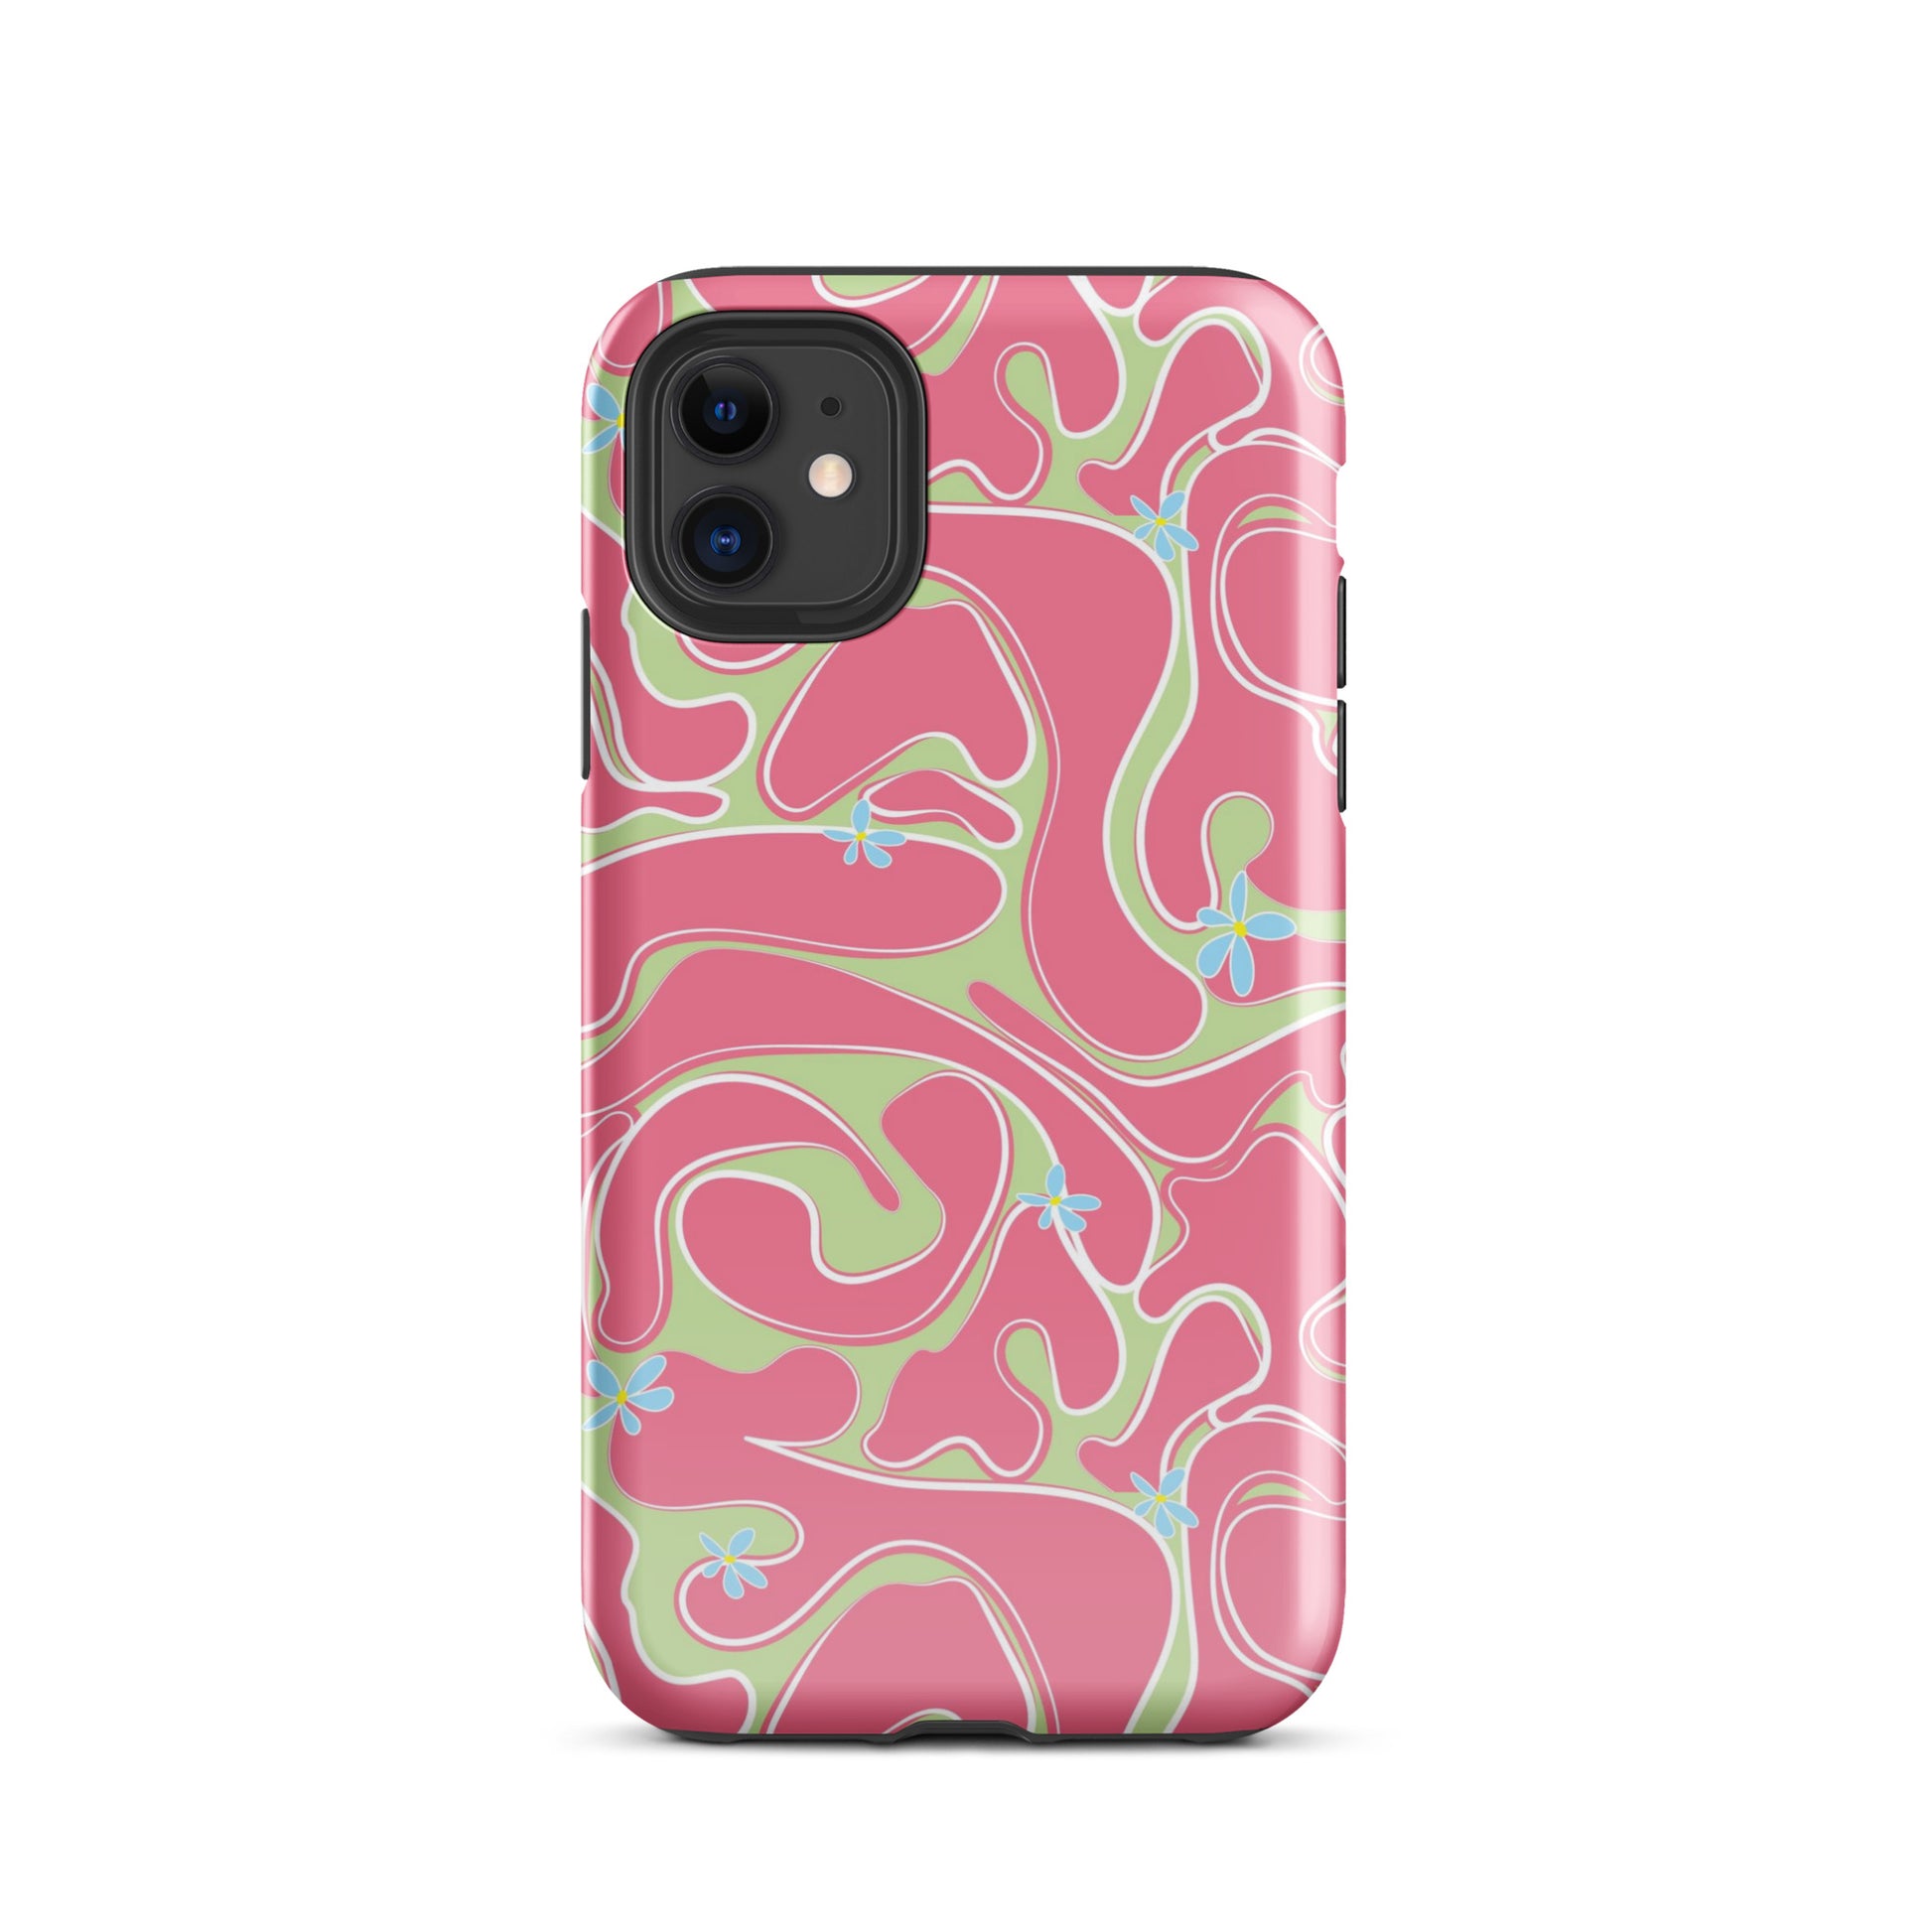 Reef Waves iPhone Case Glossy iPhone 11